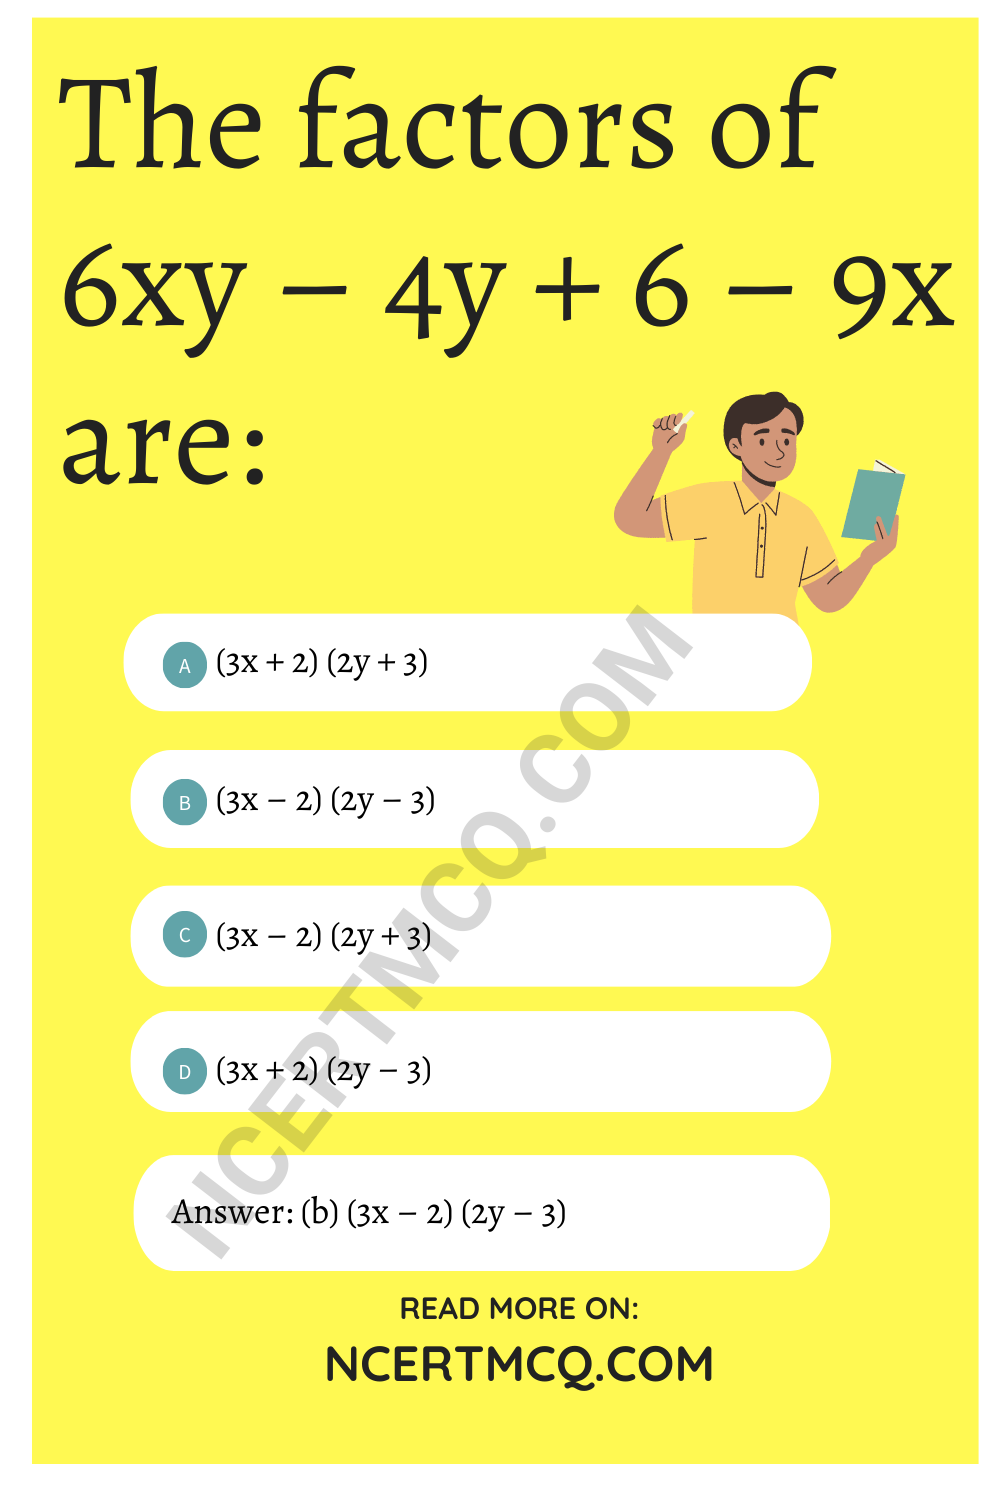 The factors of 6xy – 4y + 6 – 9x are: